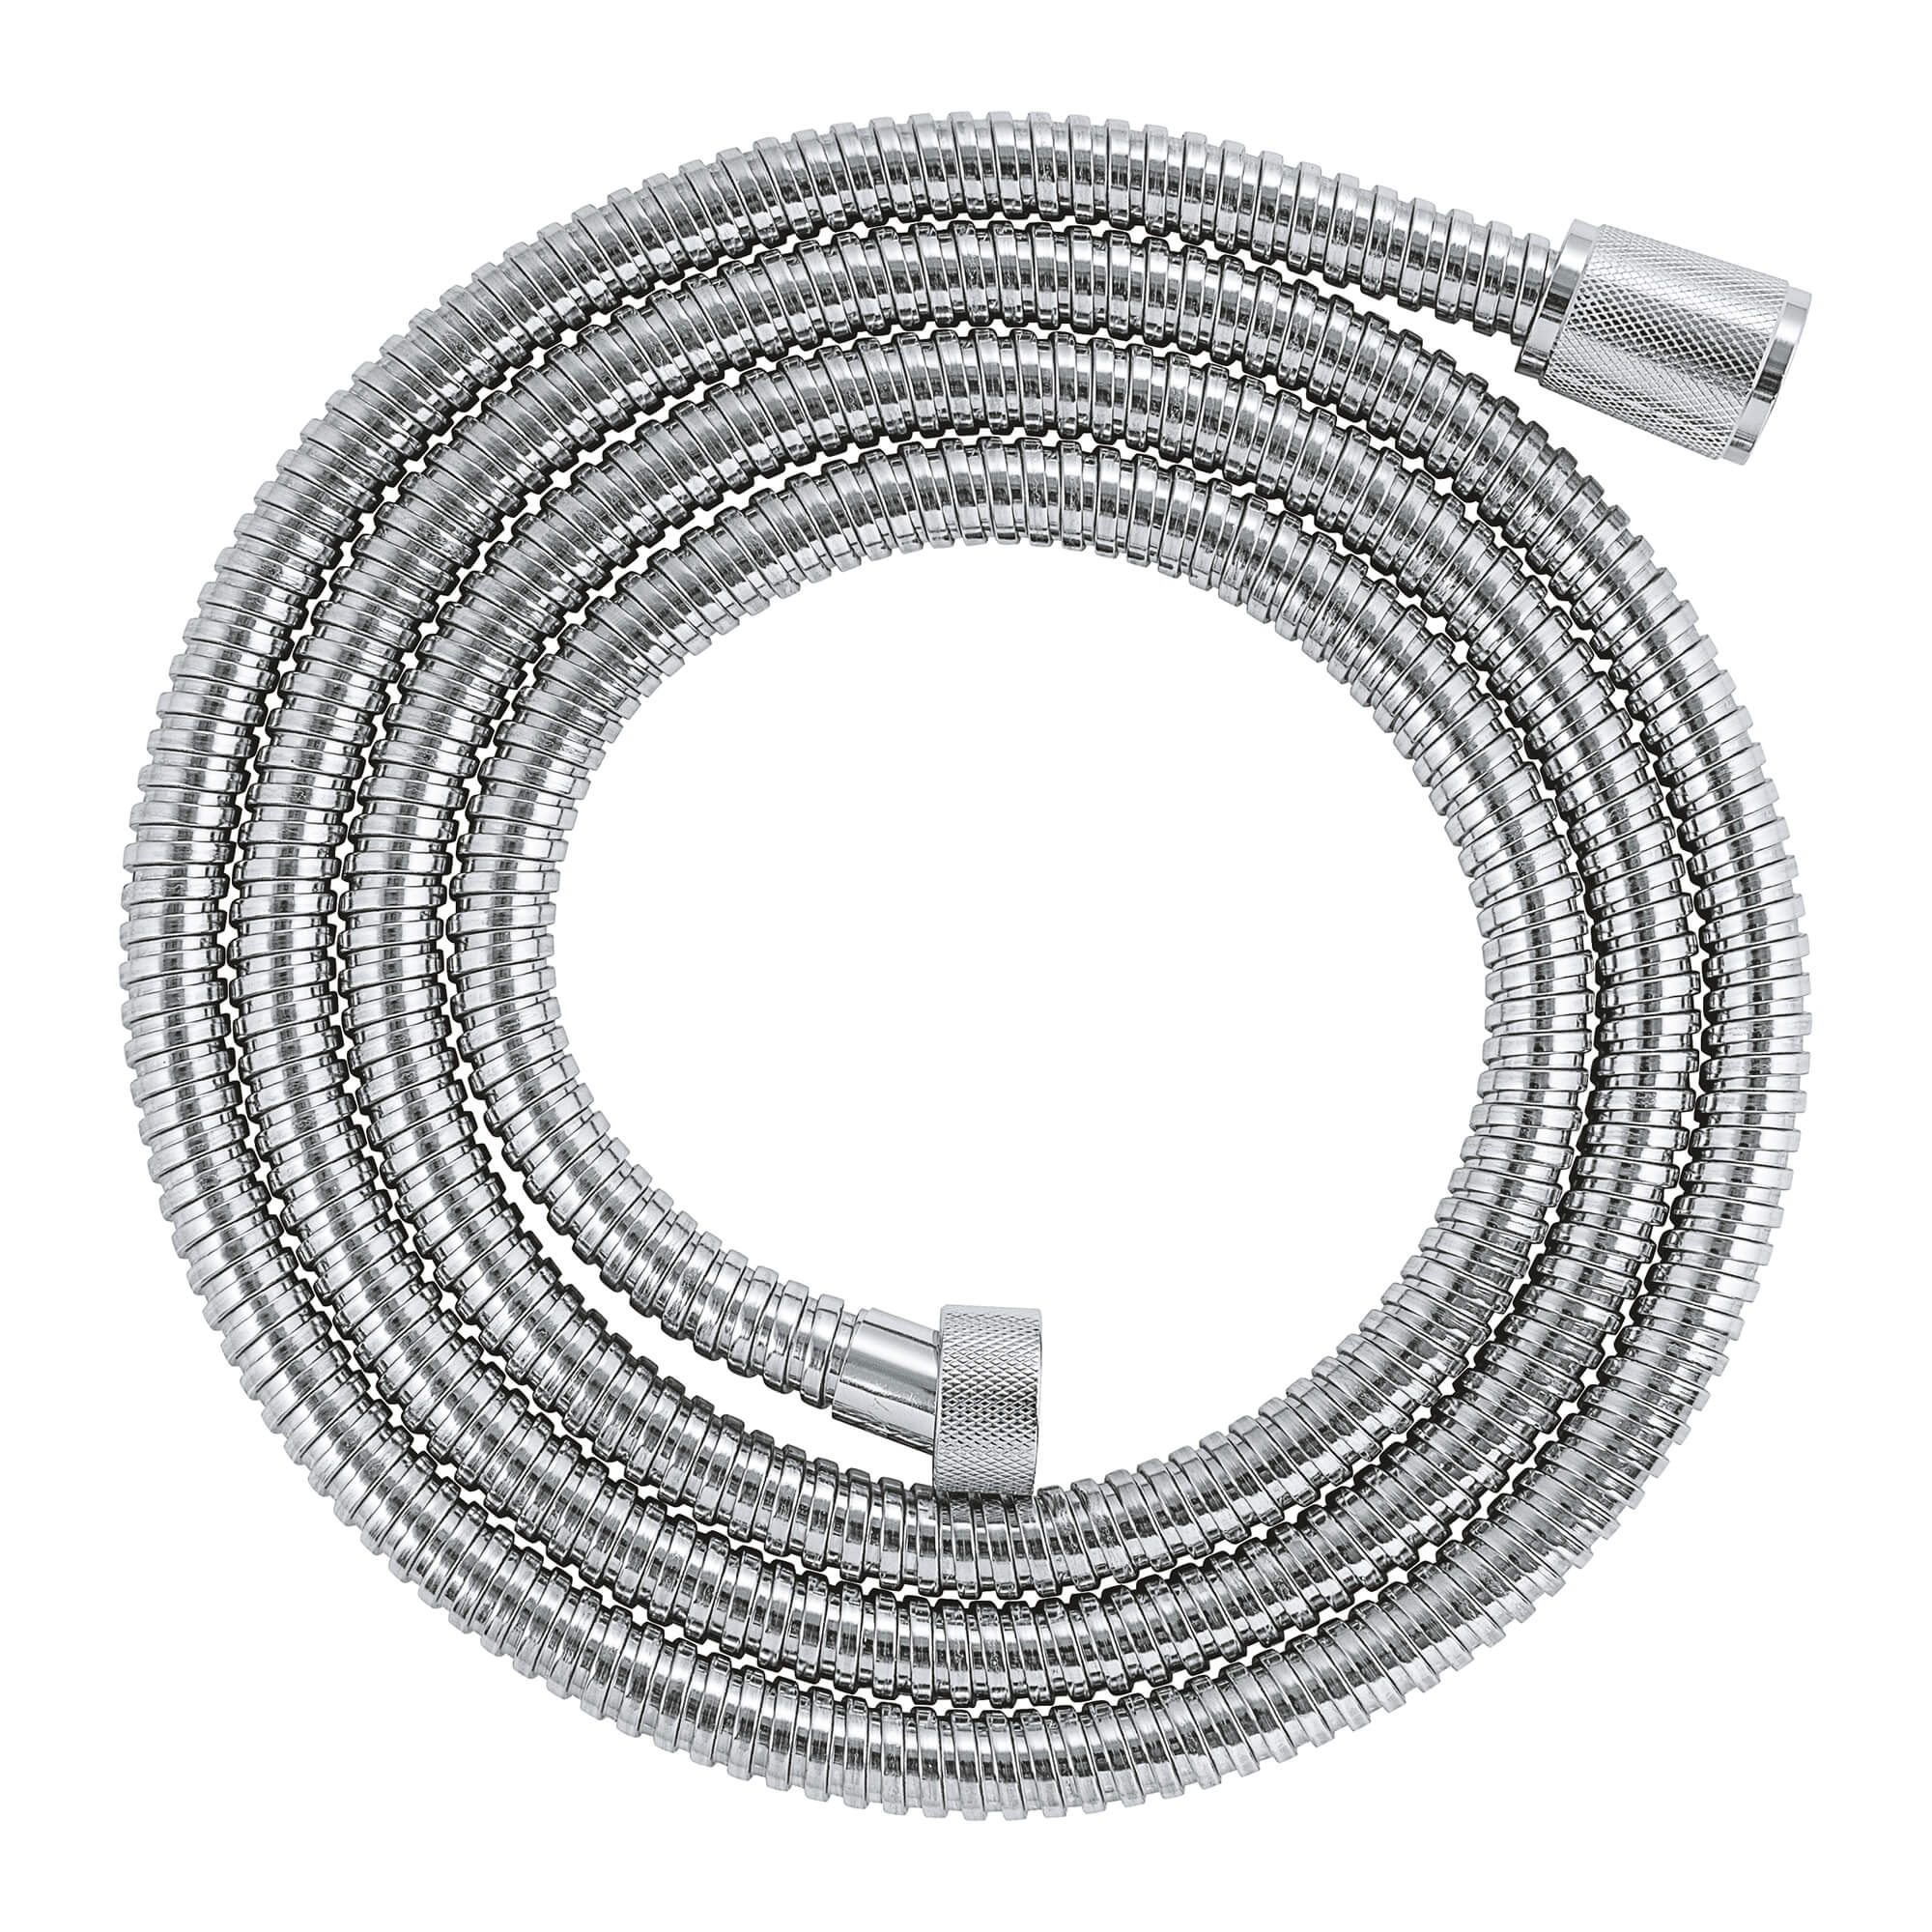 Flexible hose and hand shower for GroheK sink mixer - ESPINOSA